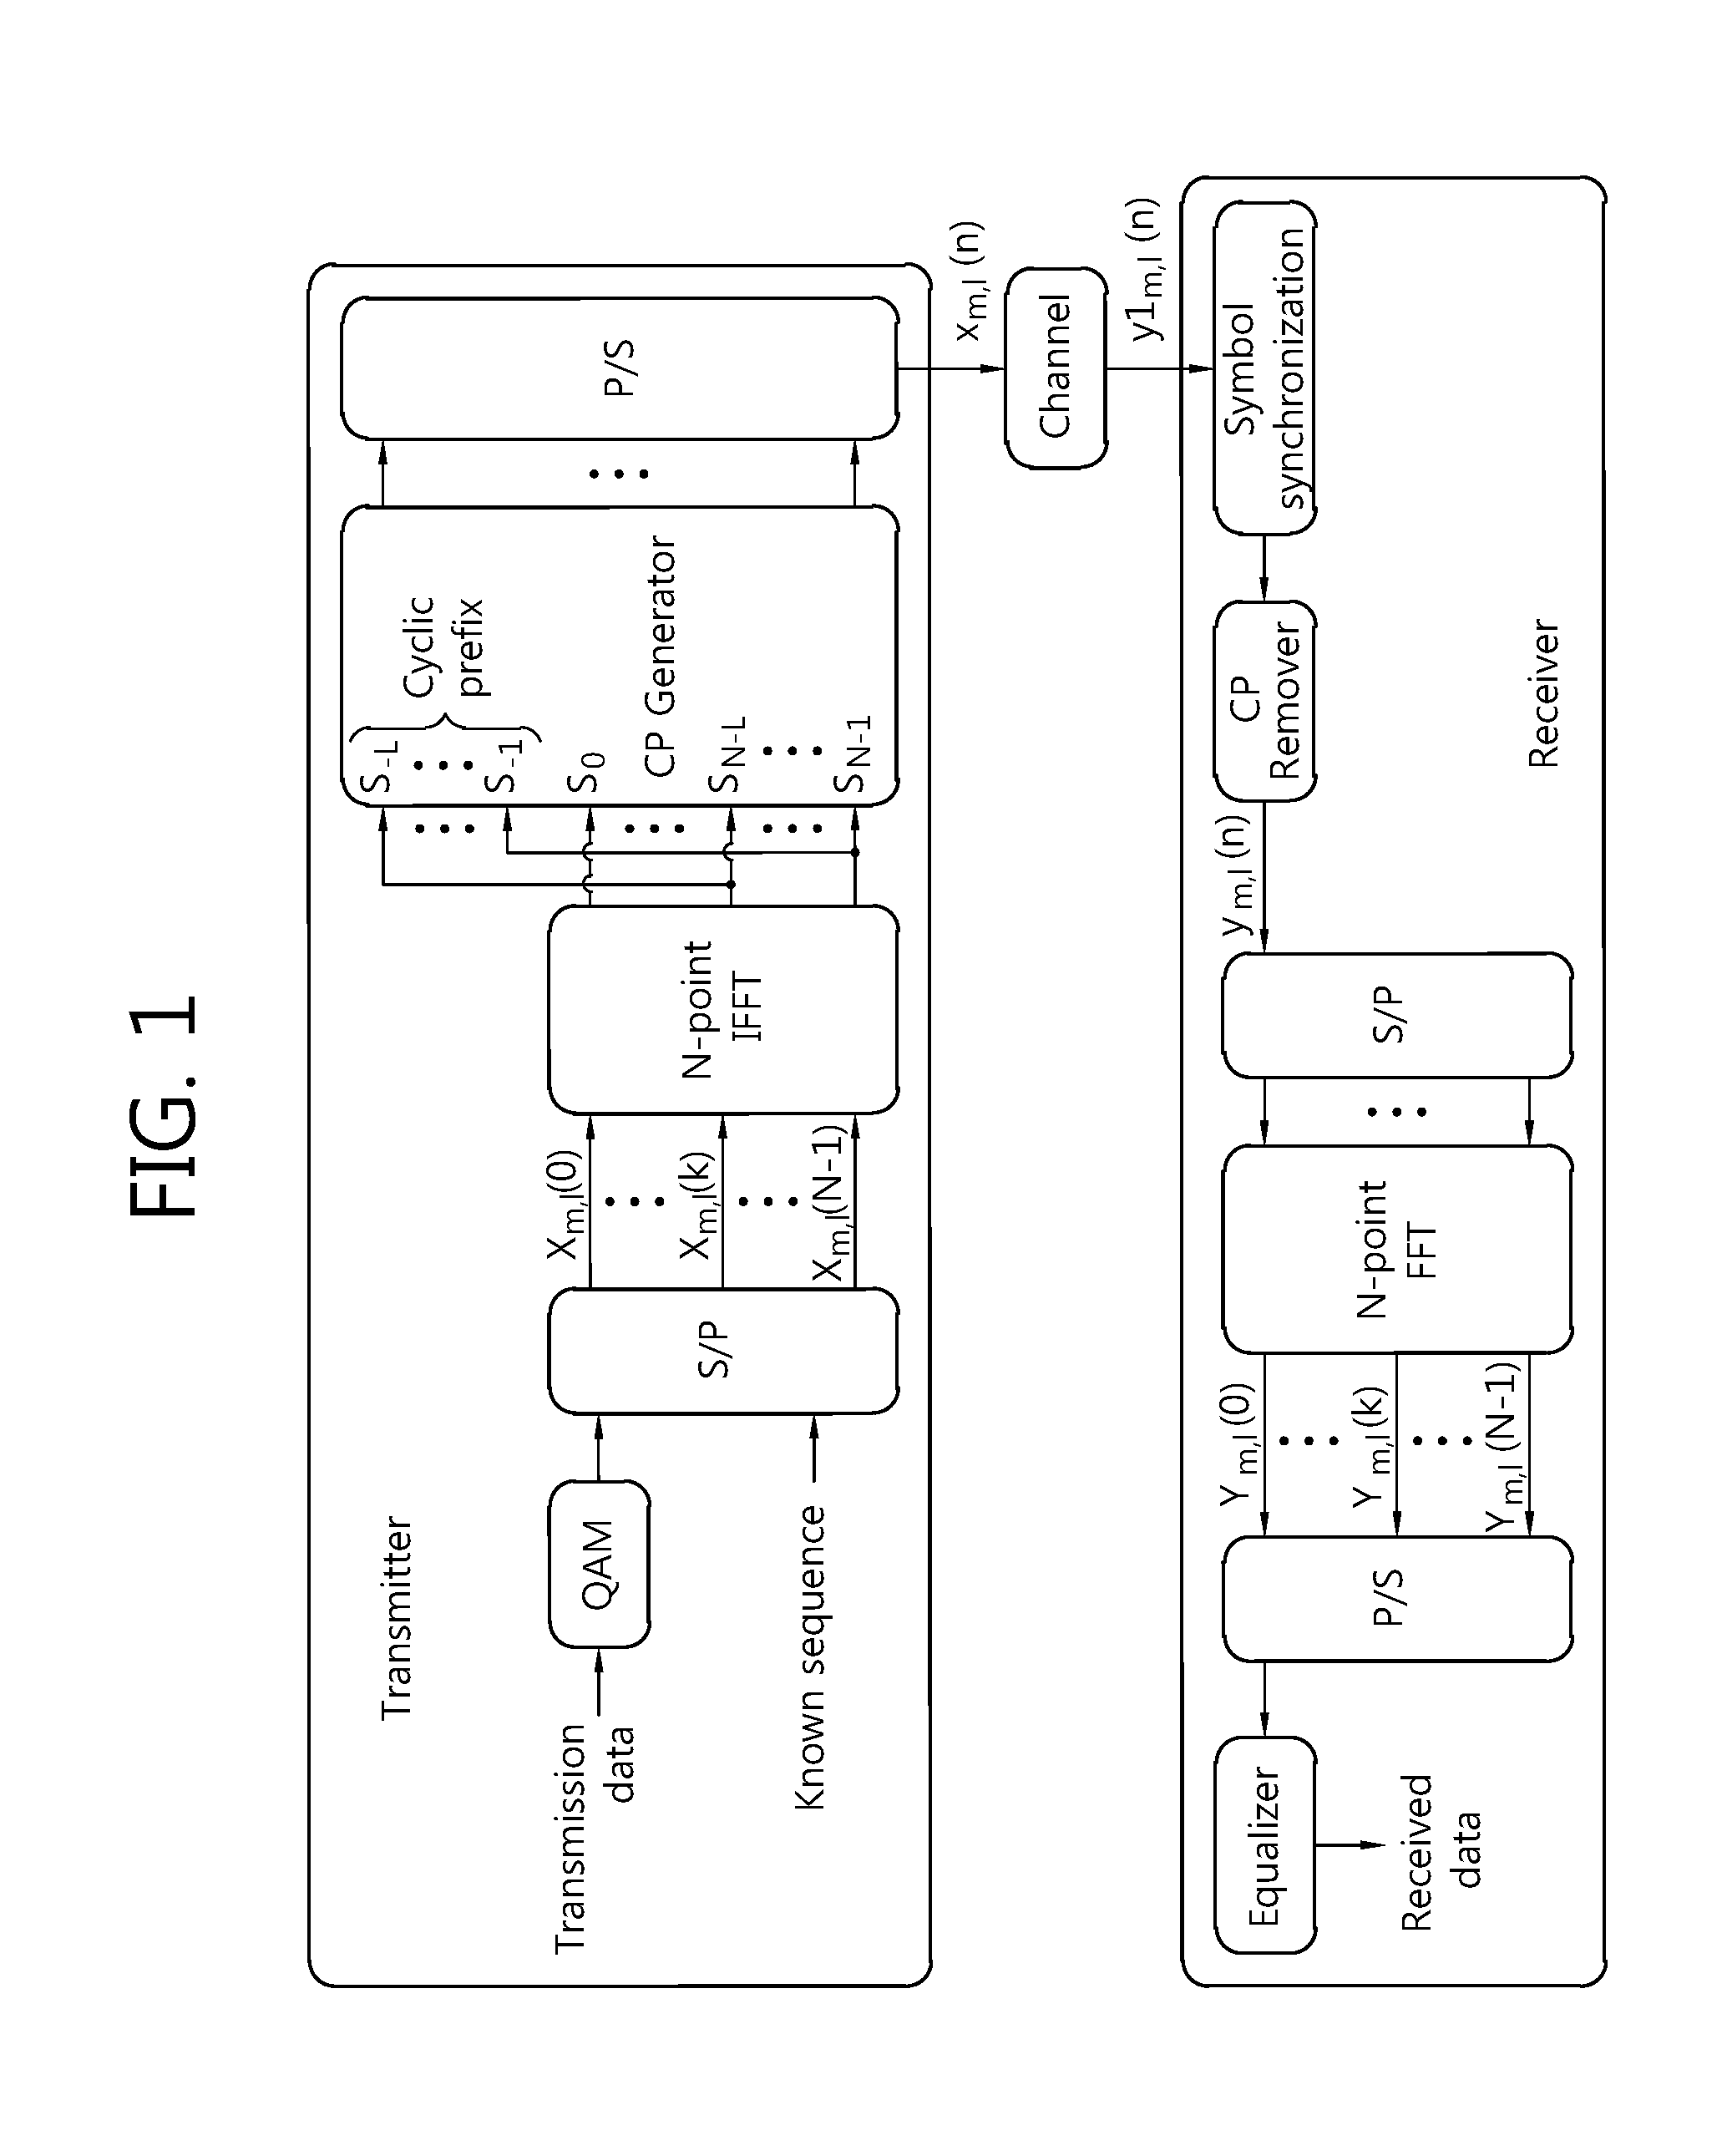 Method and apparatus for compensating for variable symbol timing using cyclic prefix in non-synchronized OFDM system